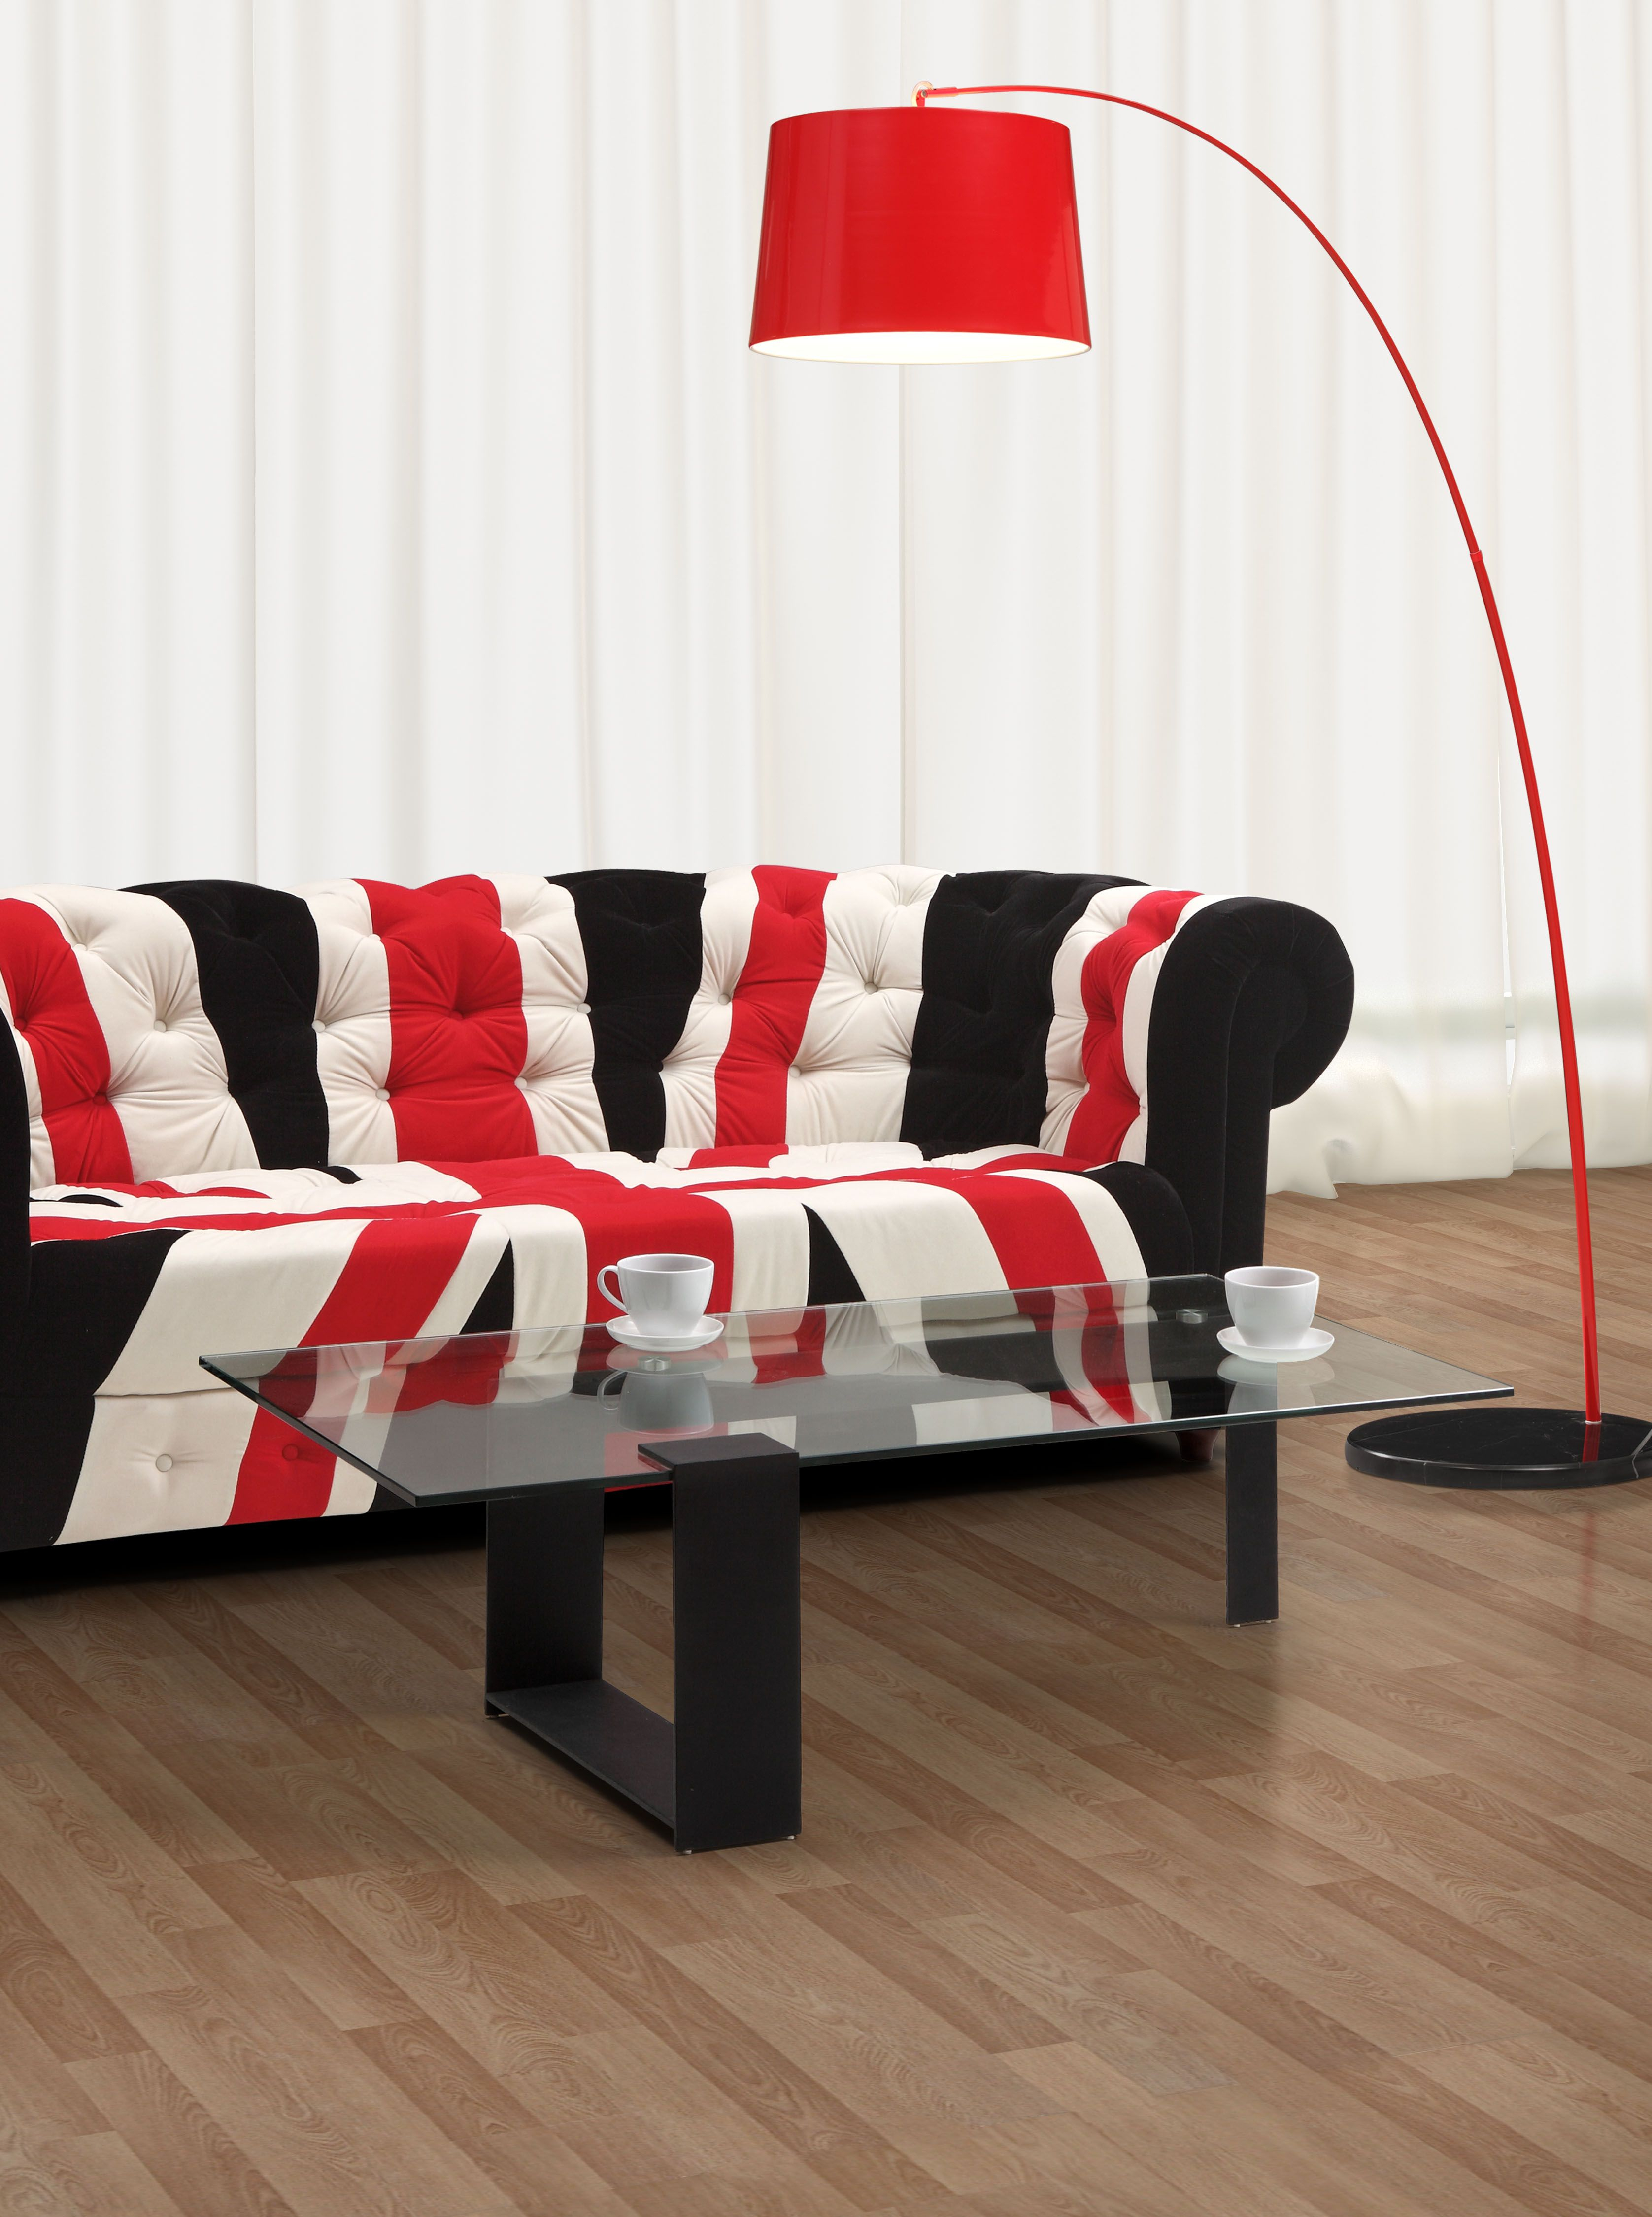 Union Jack Sofa And Red Twisty Lamp Zuo Modern Zuo pertaining to size 3353 X 4500